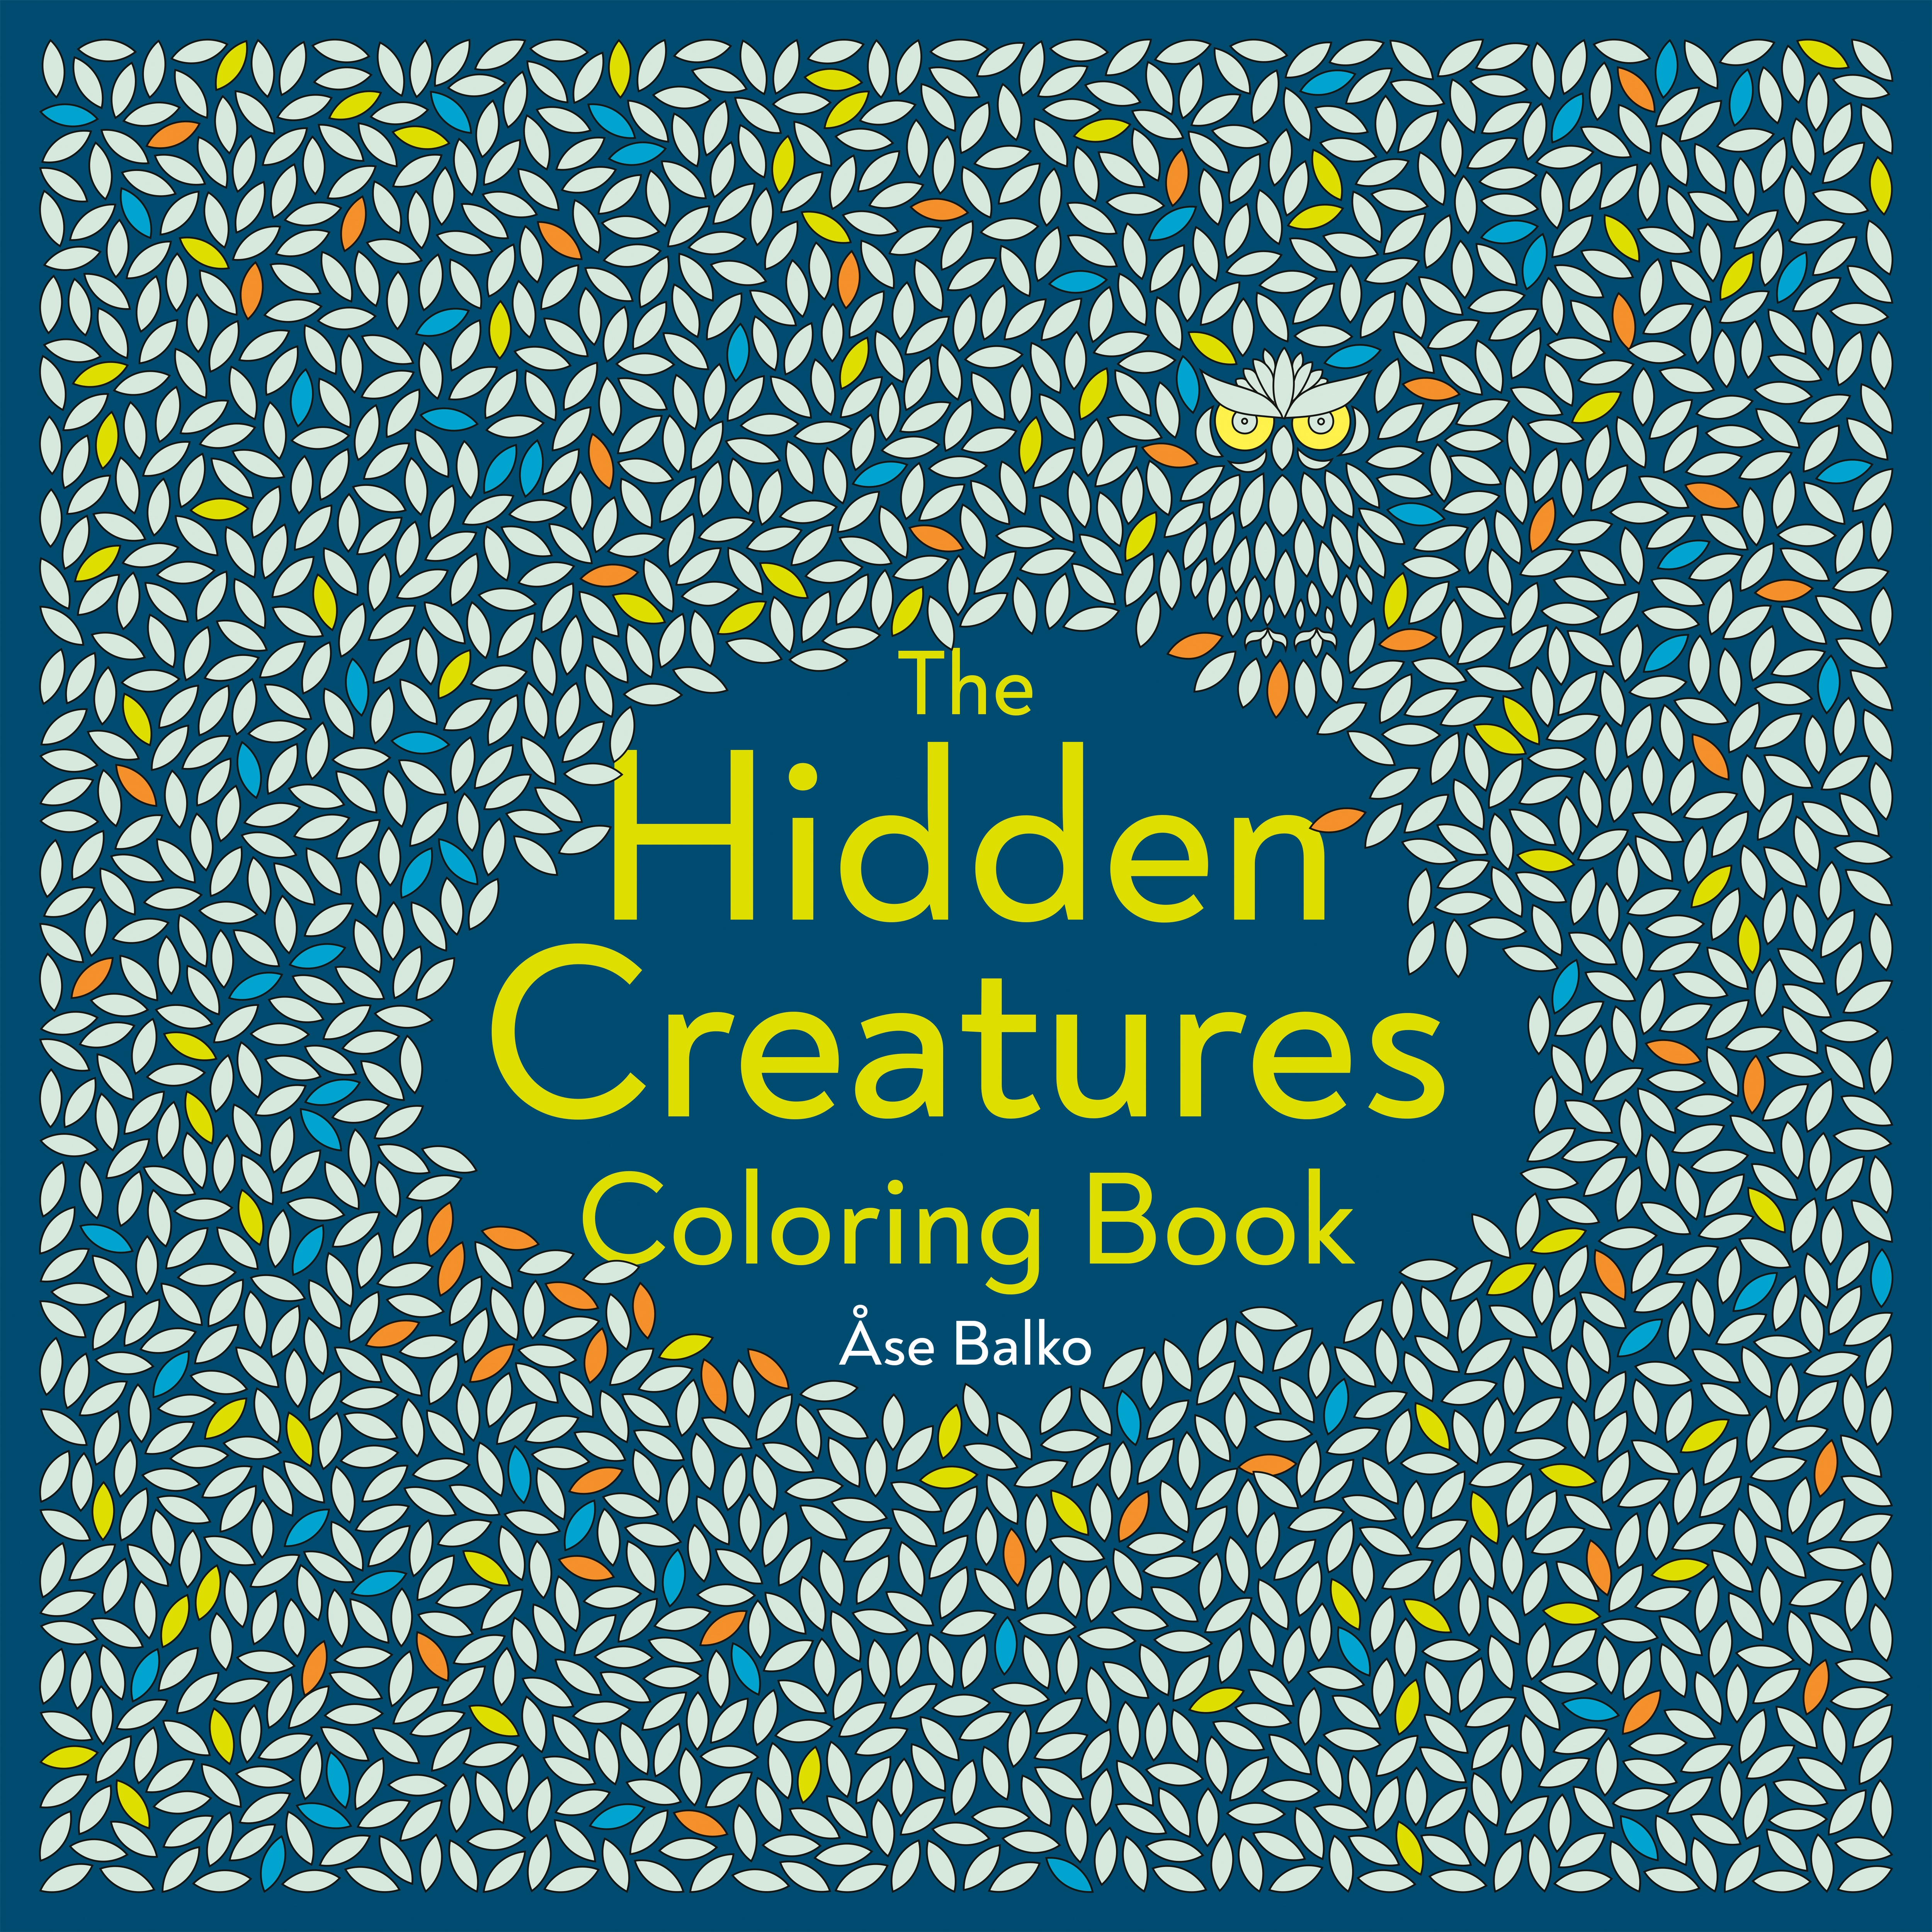 Coloring Books for Teens and Adults: Playful Patterns Coloring